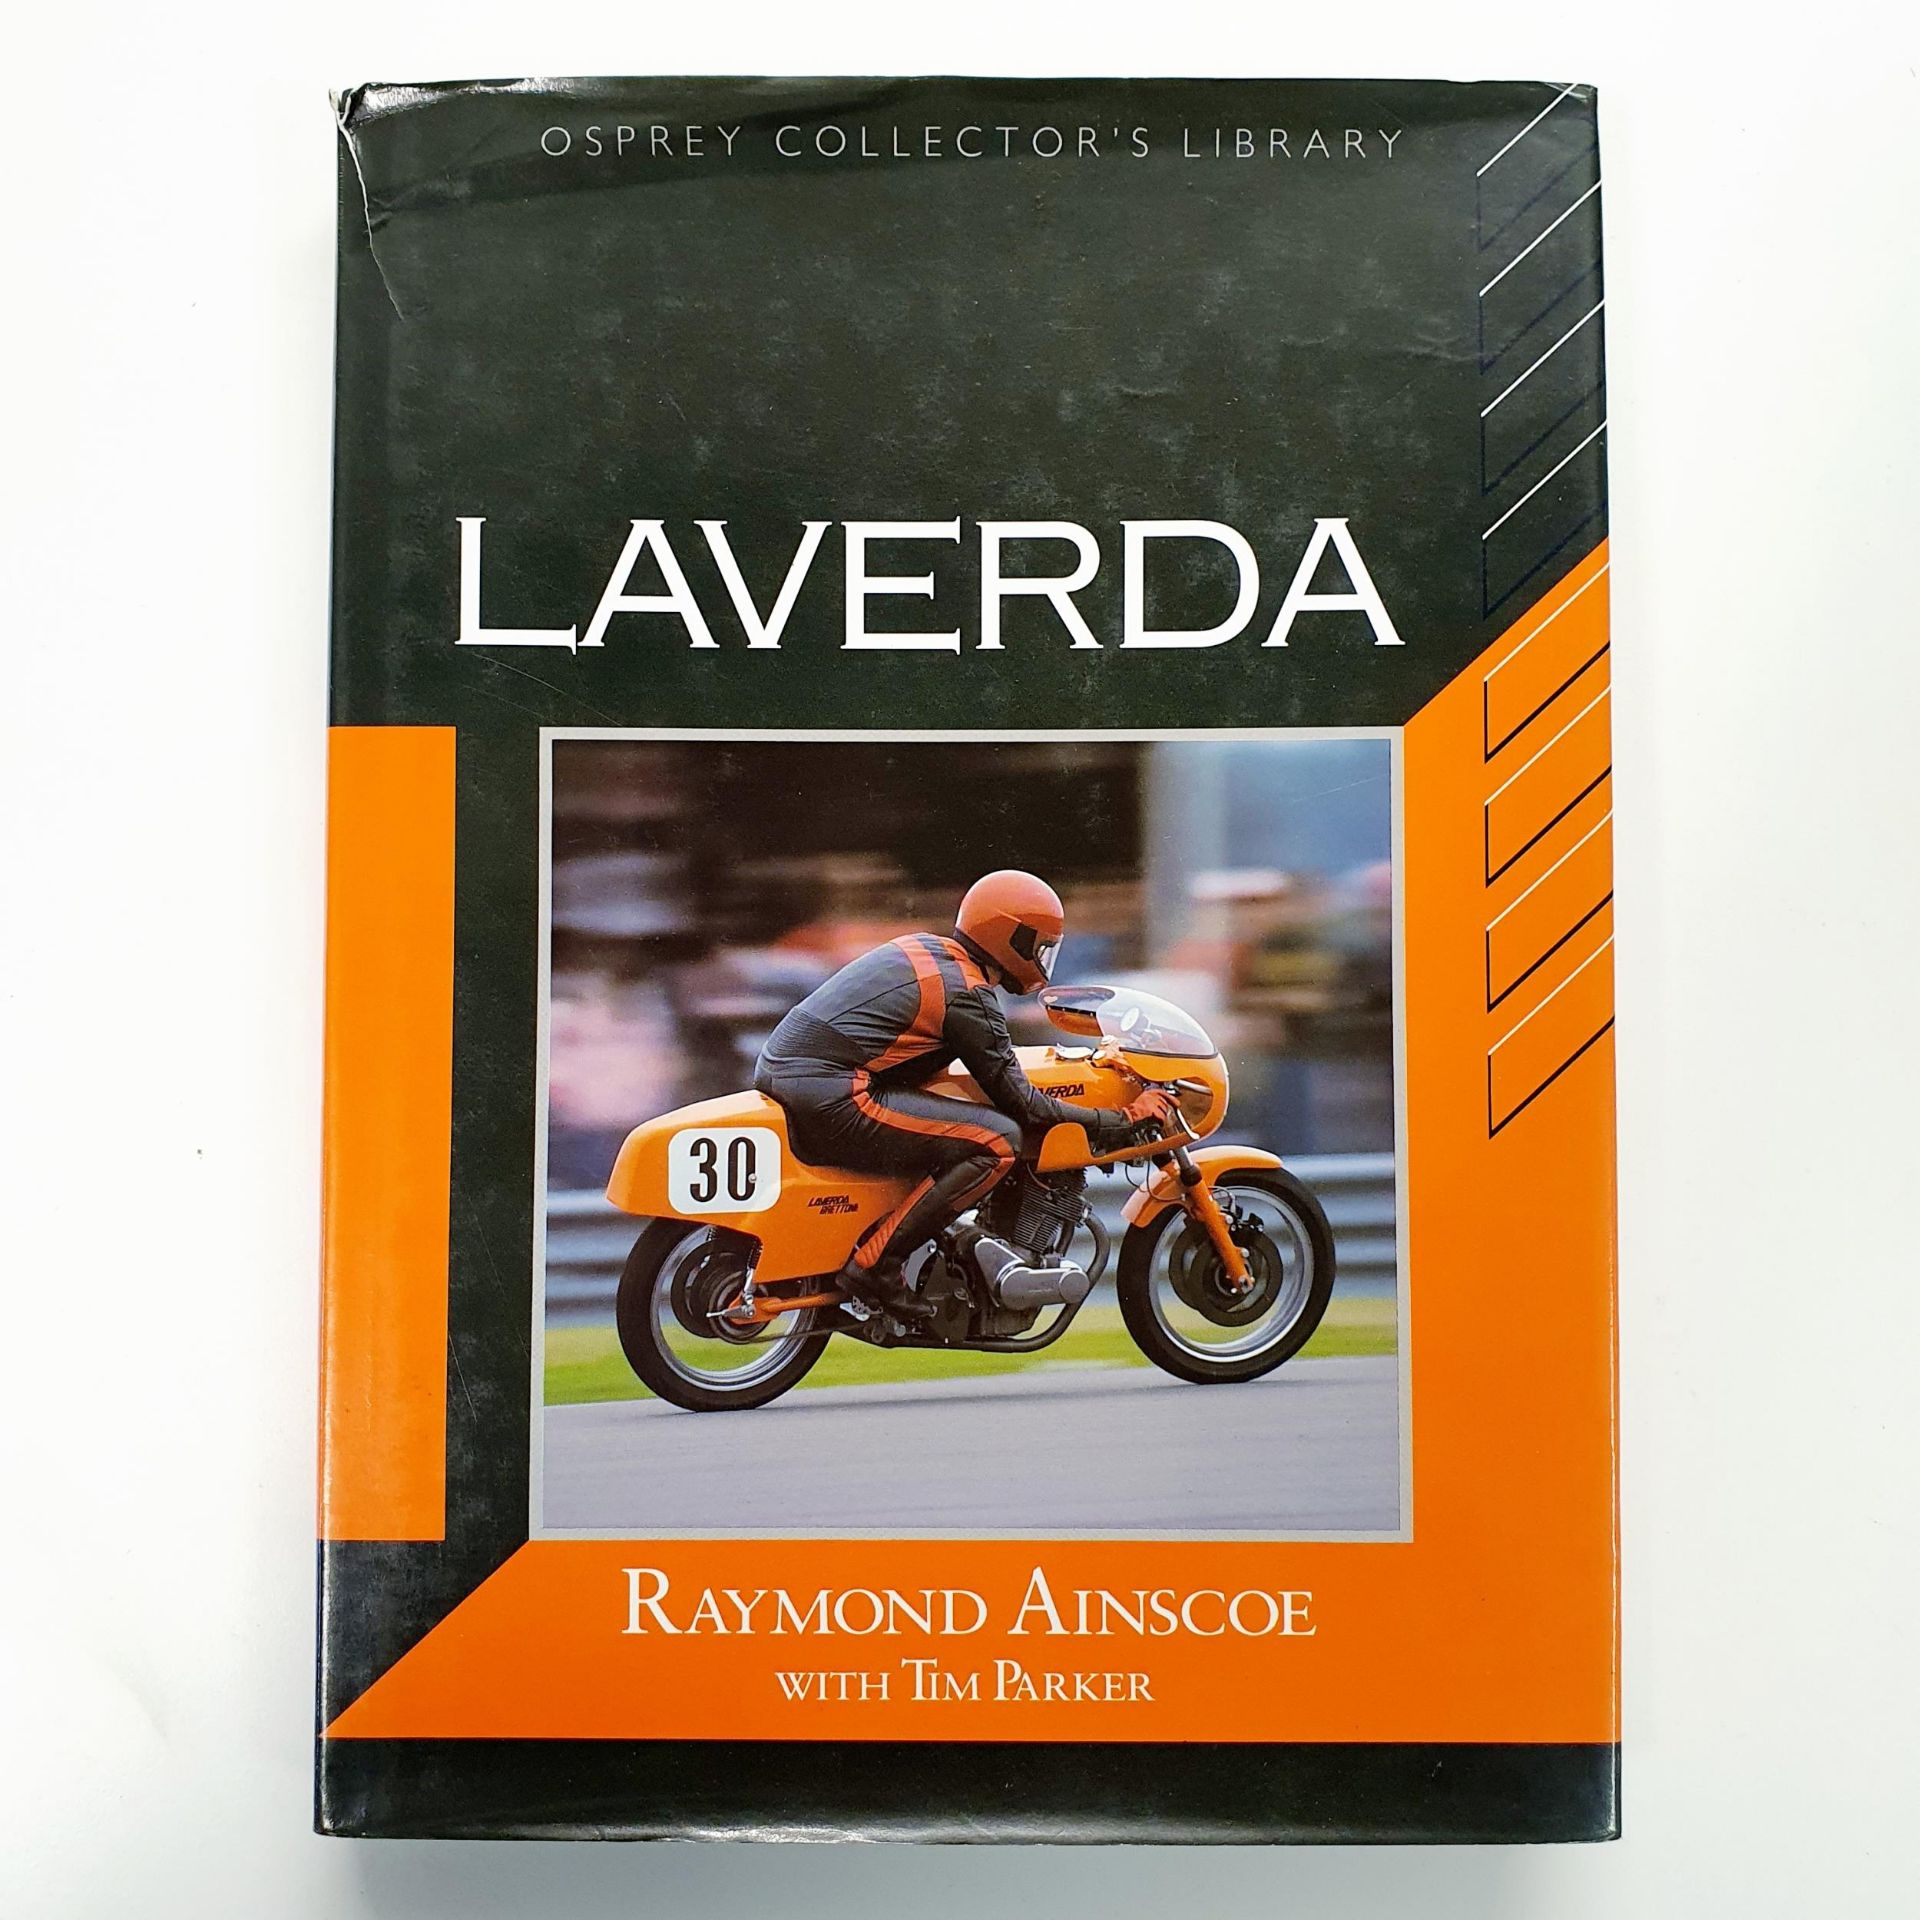 Ainscoe (Raymond), and Parker (Tim), Laverda, 1991 Provenance: From The Elwyn Roberts Collection